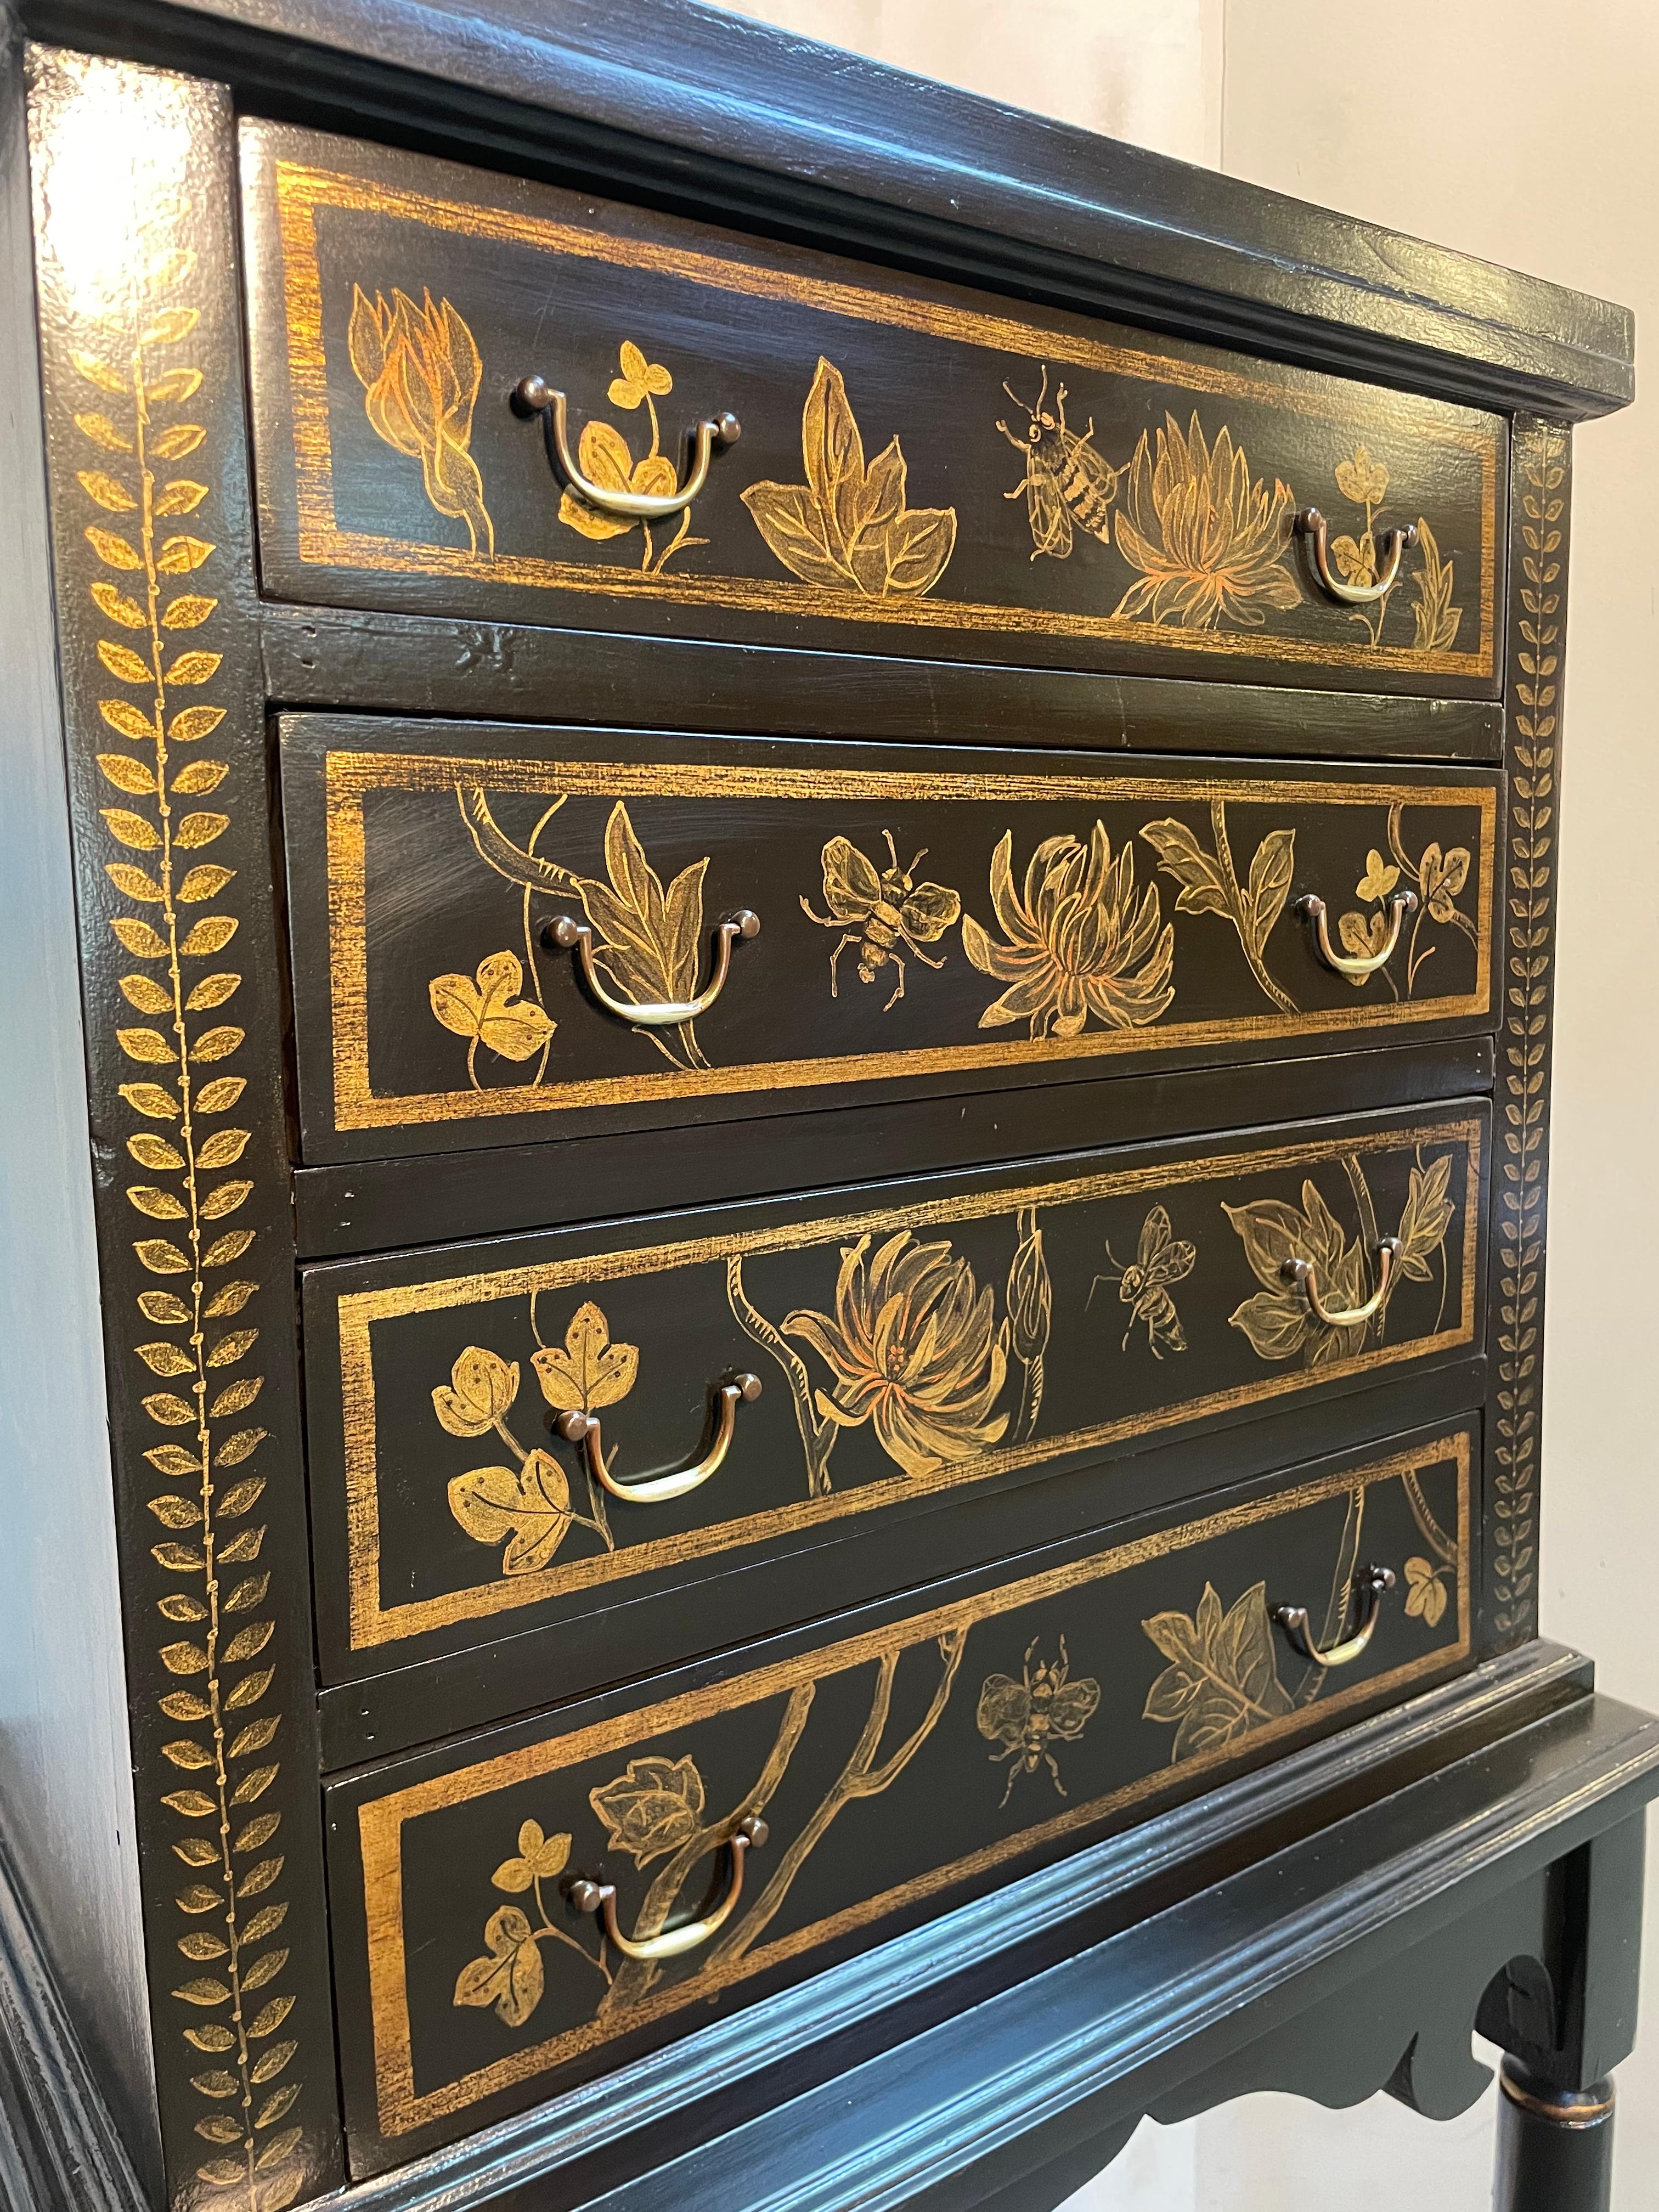 Made in the late 19th century to early 20th century, this beautiful floral 4 drawer chest on a detachable stand is a must have for your home. All of the chinoiserie gold foliage design was hand painted; giving it more of an organic energy. The